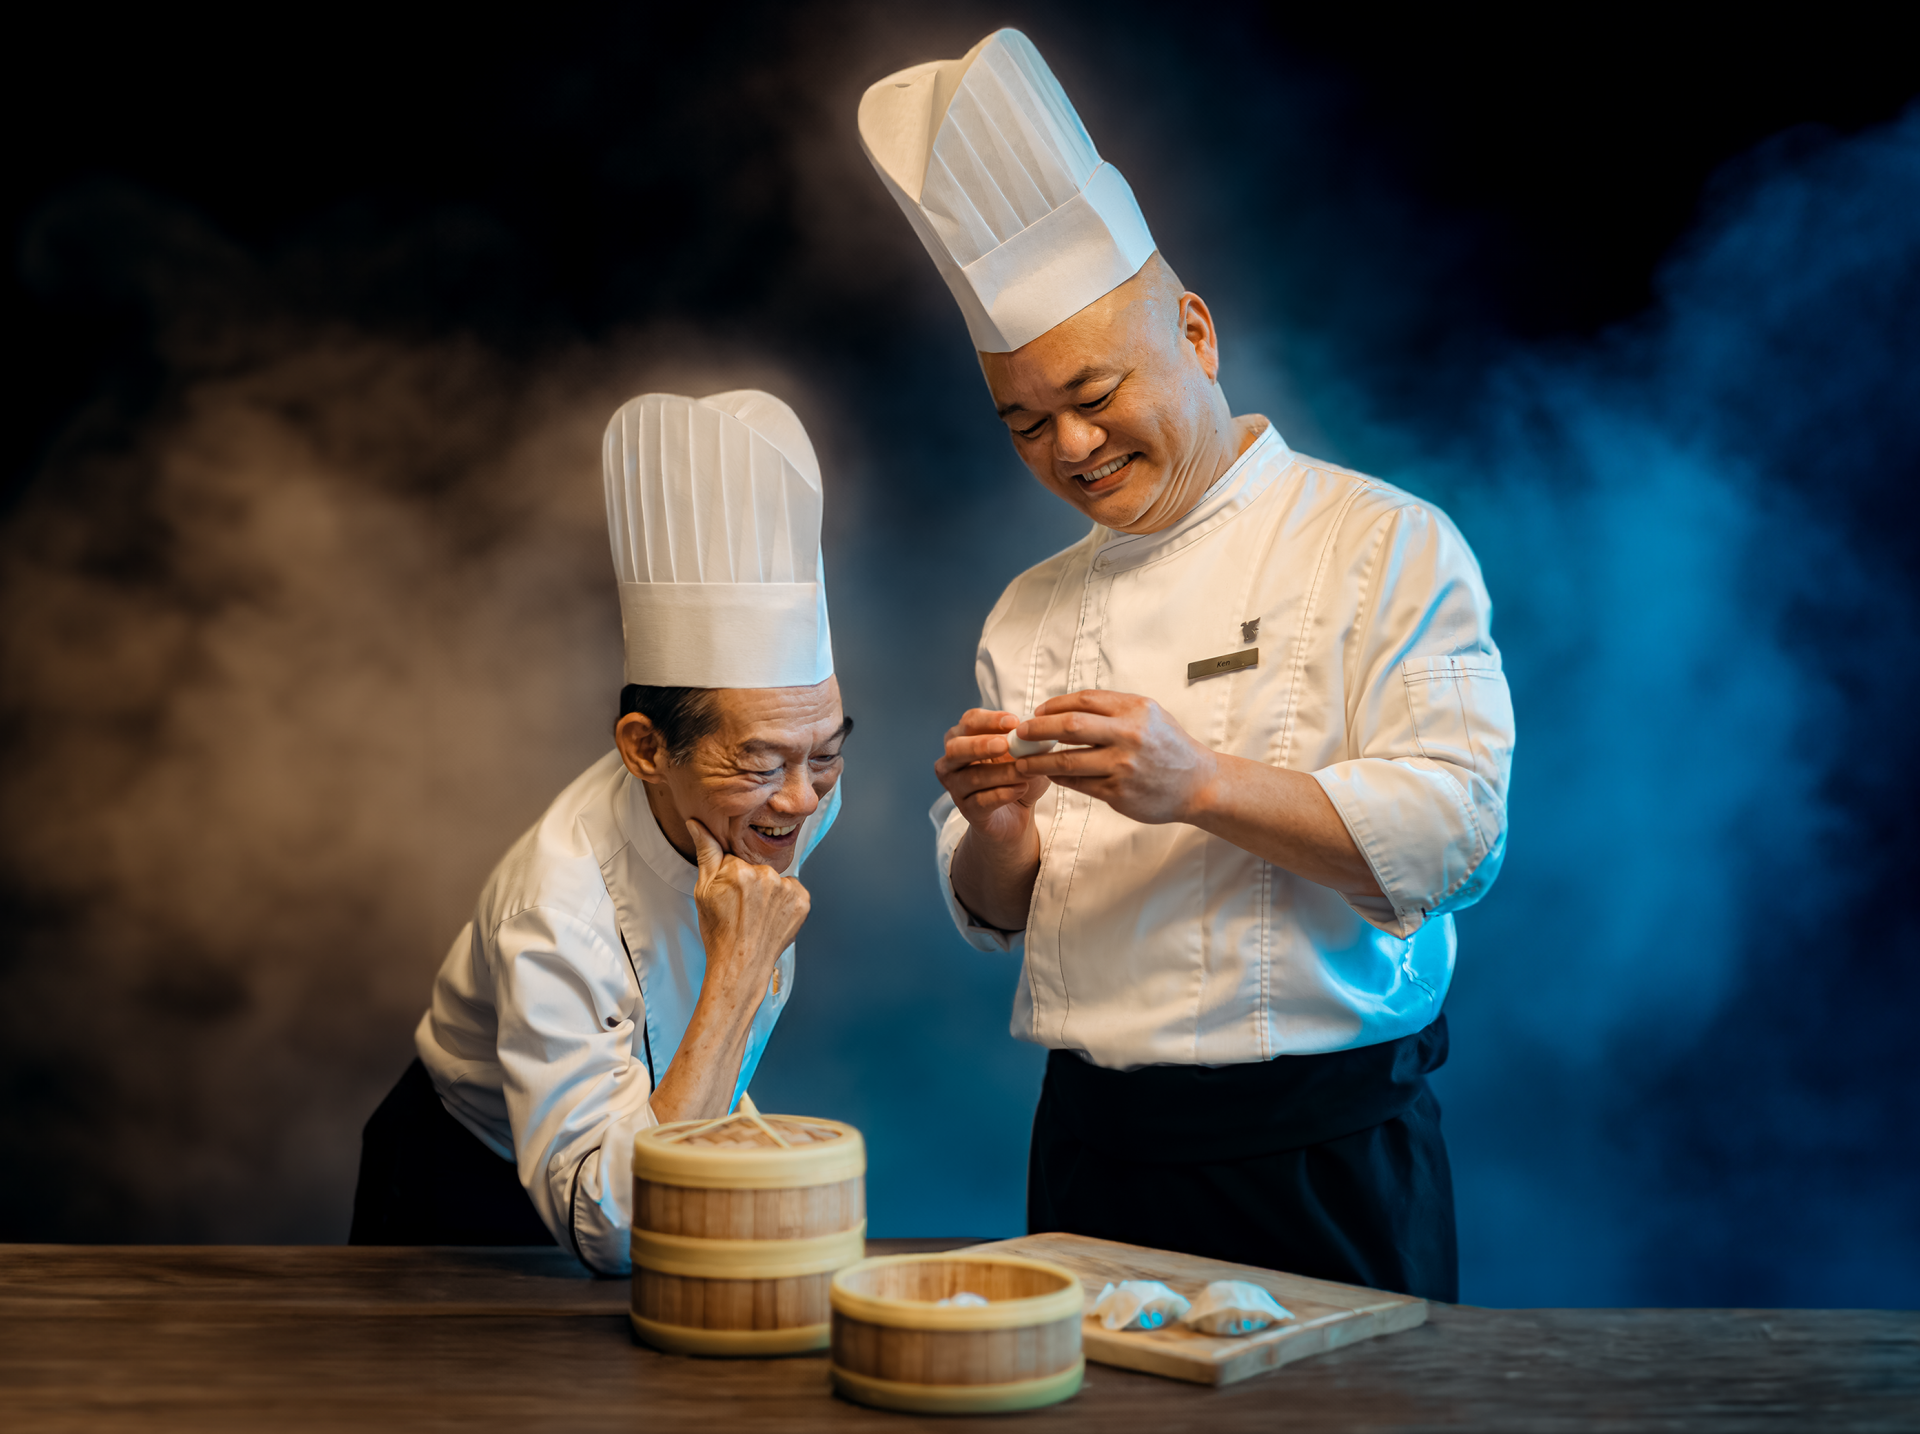 Sheraton Saigon elevates dim sum experience with Cantonese guest chef